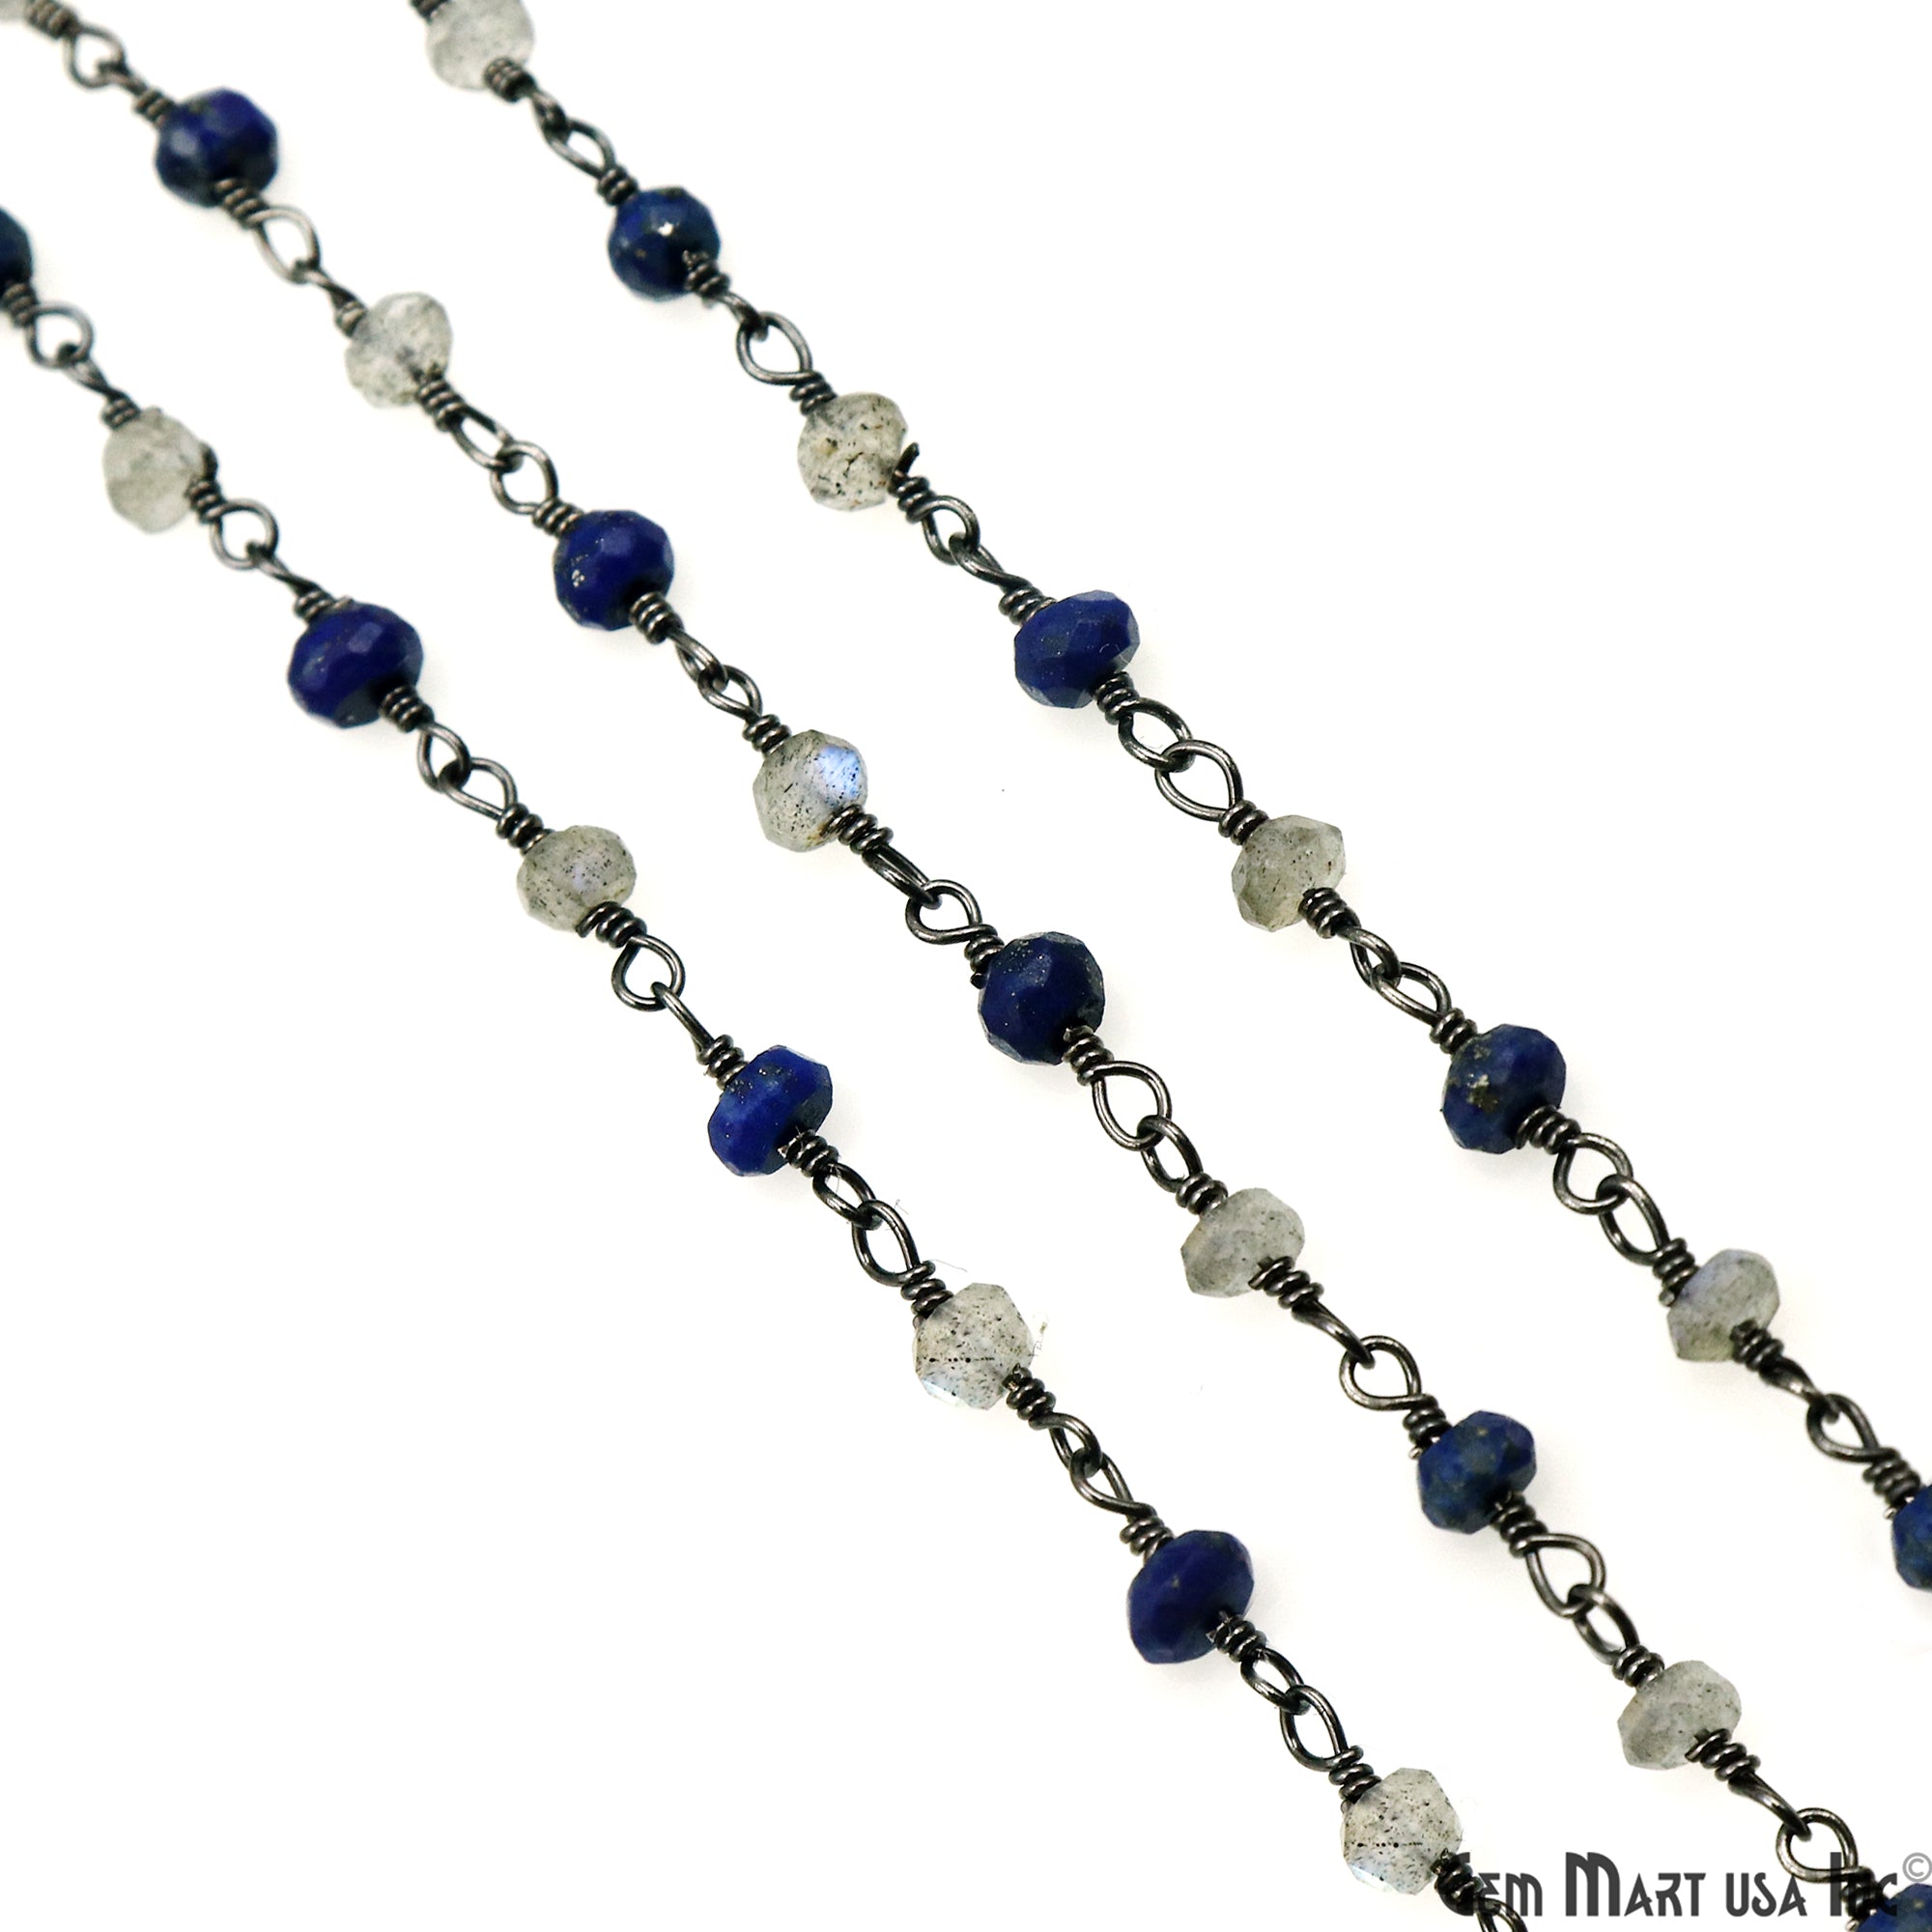 Lapis & Labradorite 3-3.5mm Oxidized Faceted Beads Wire Wrapped Rosary Chain